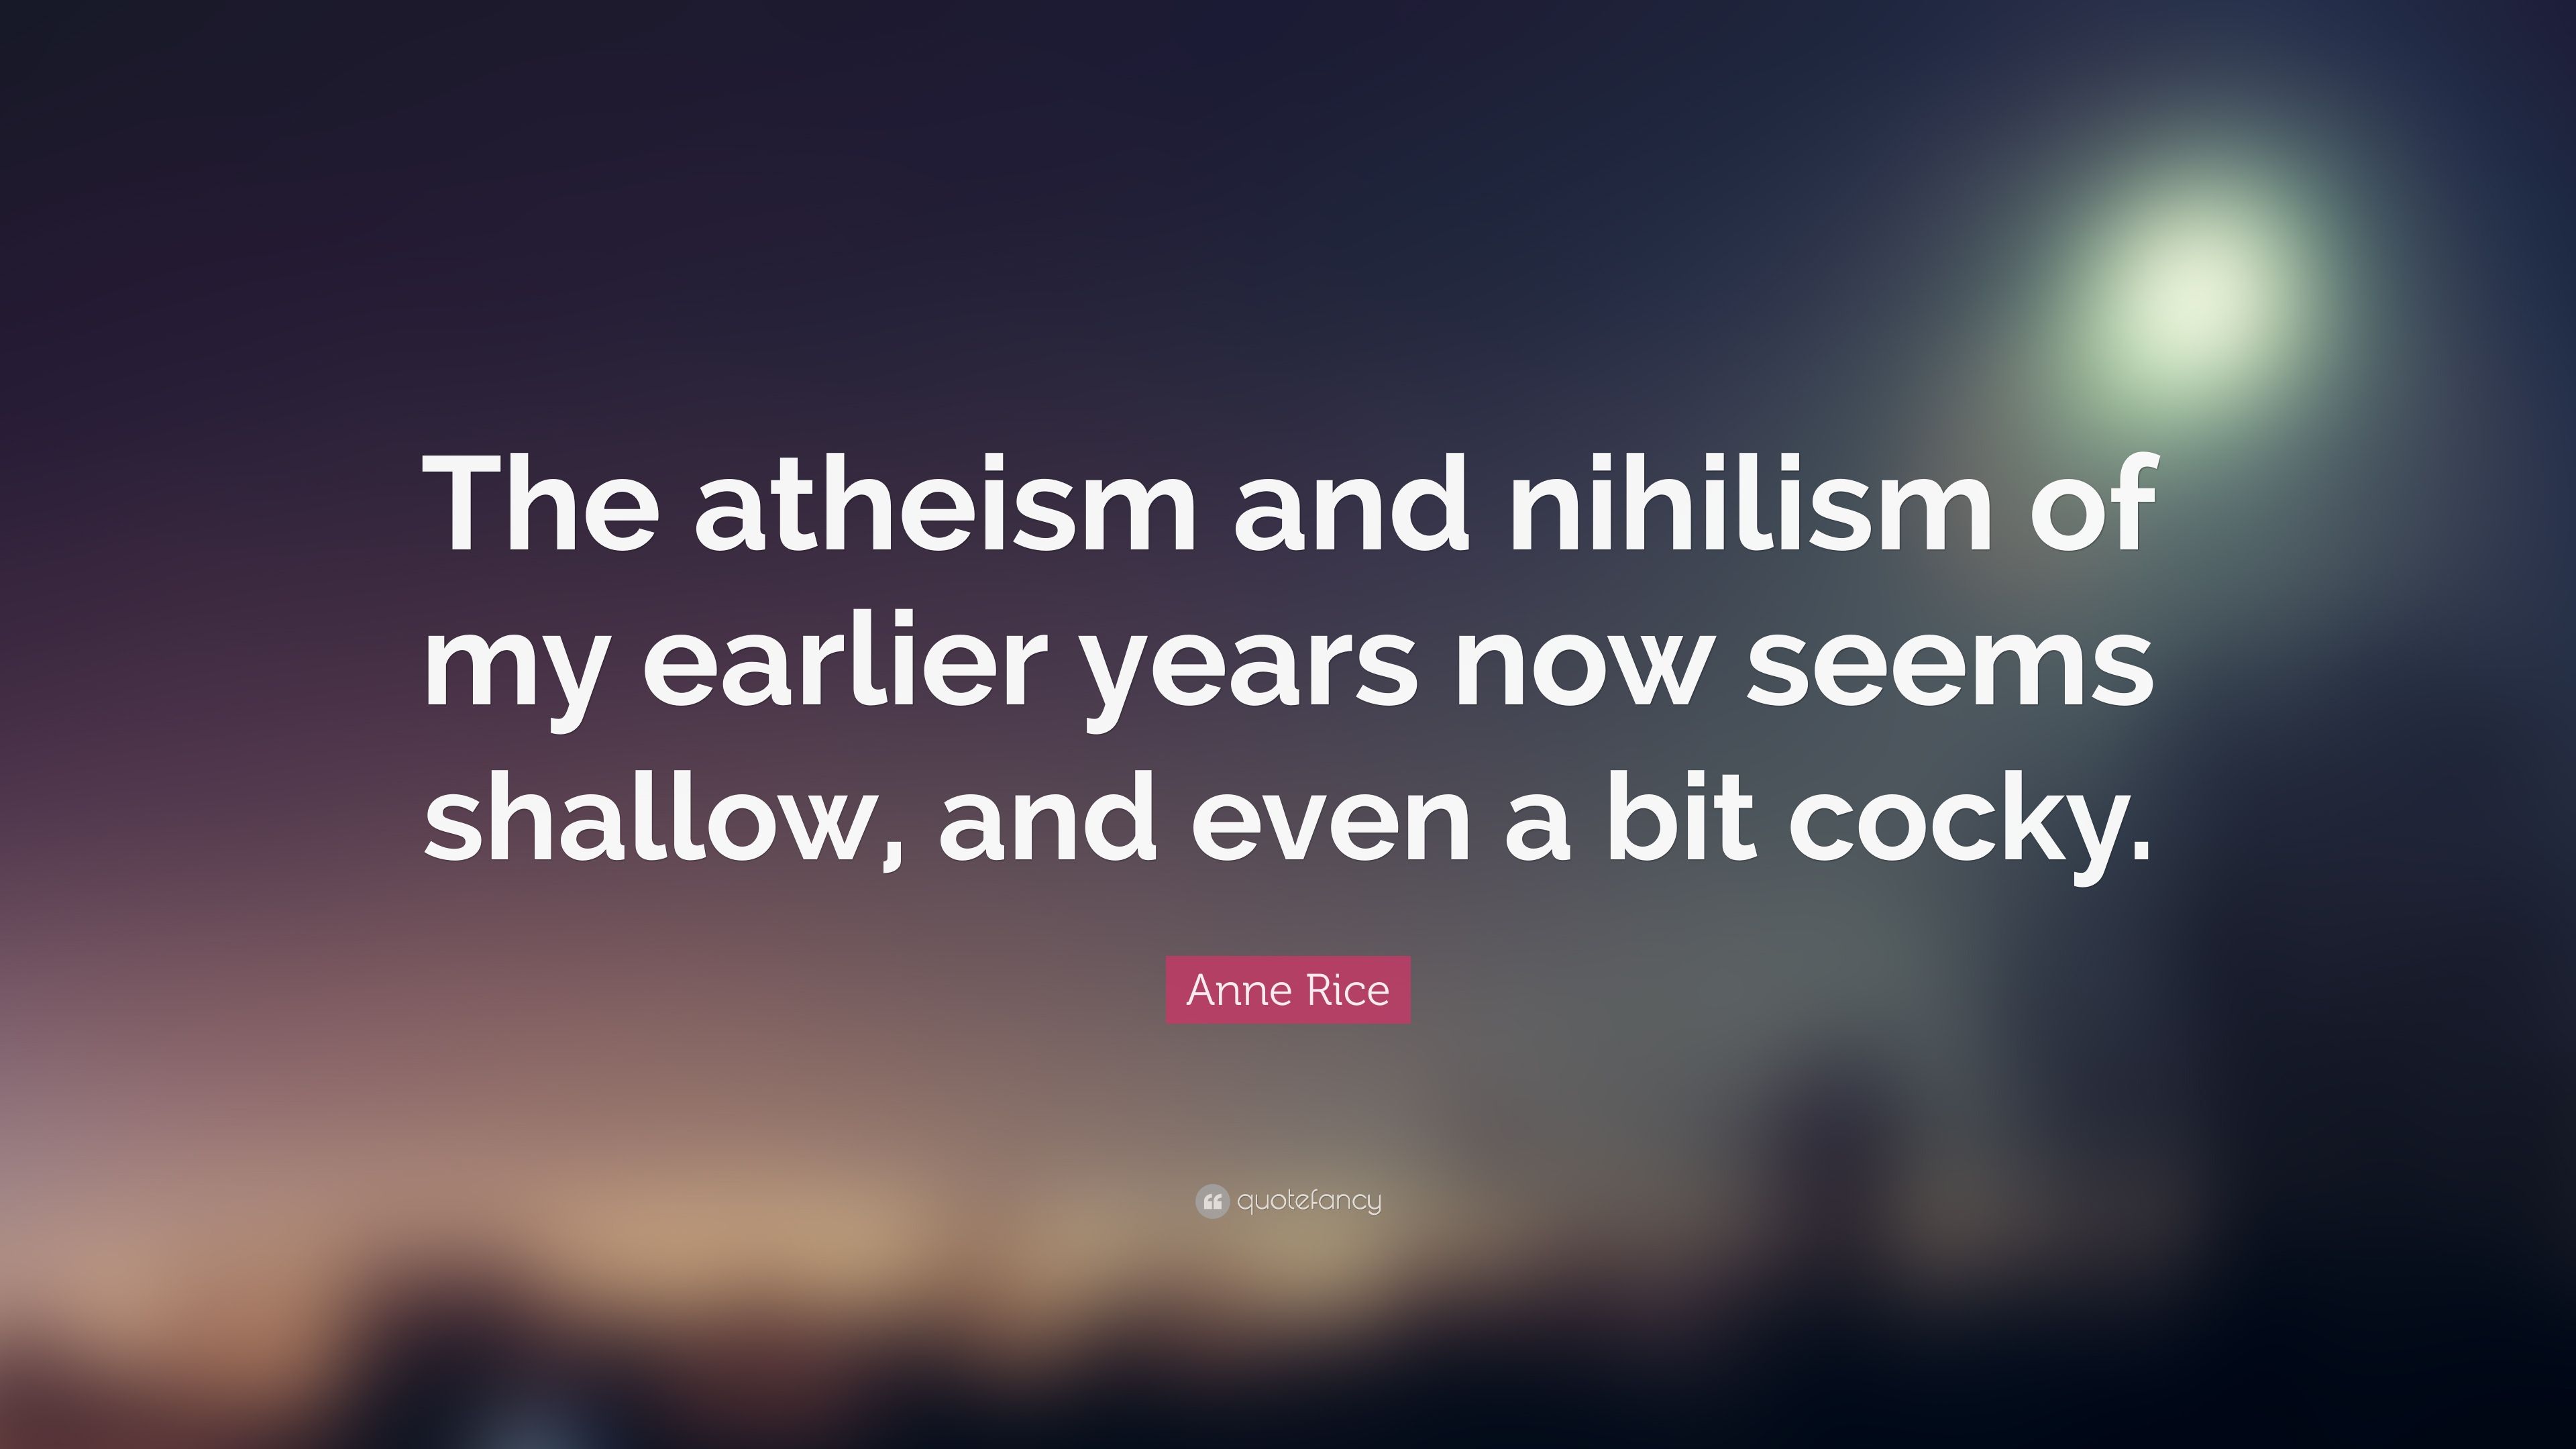 Anne Rice Quote: “The atheism and nihilism of my earlier years now seems shallow, and even a bit cocky.” (7 wallpaper)